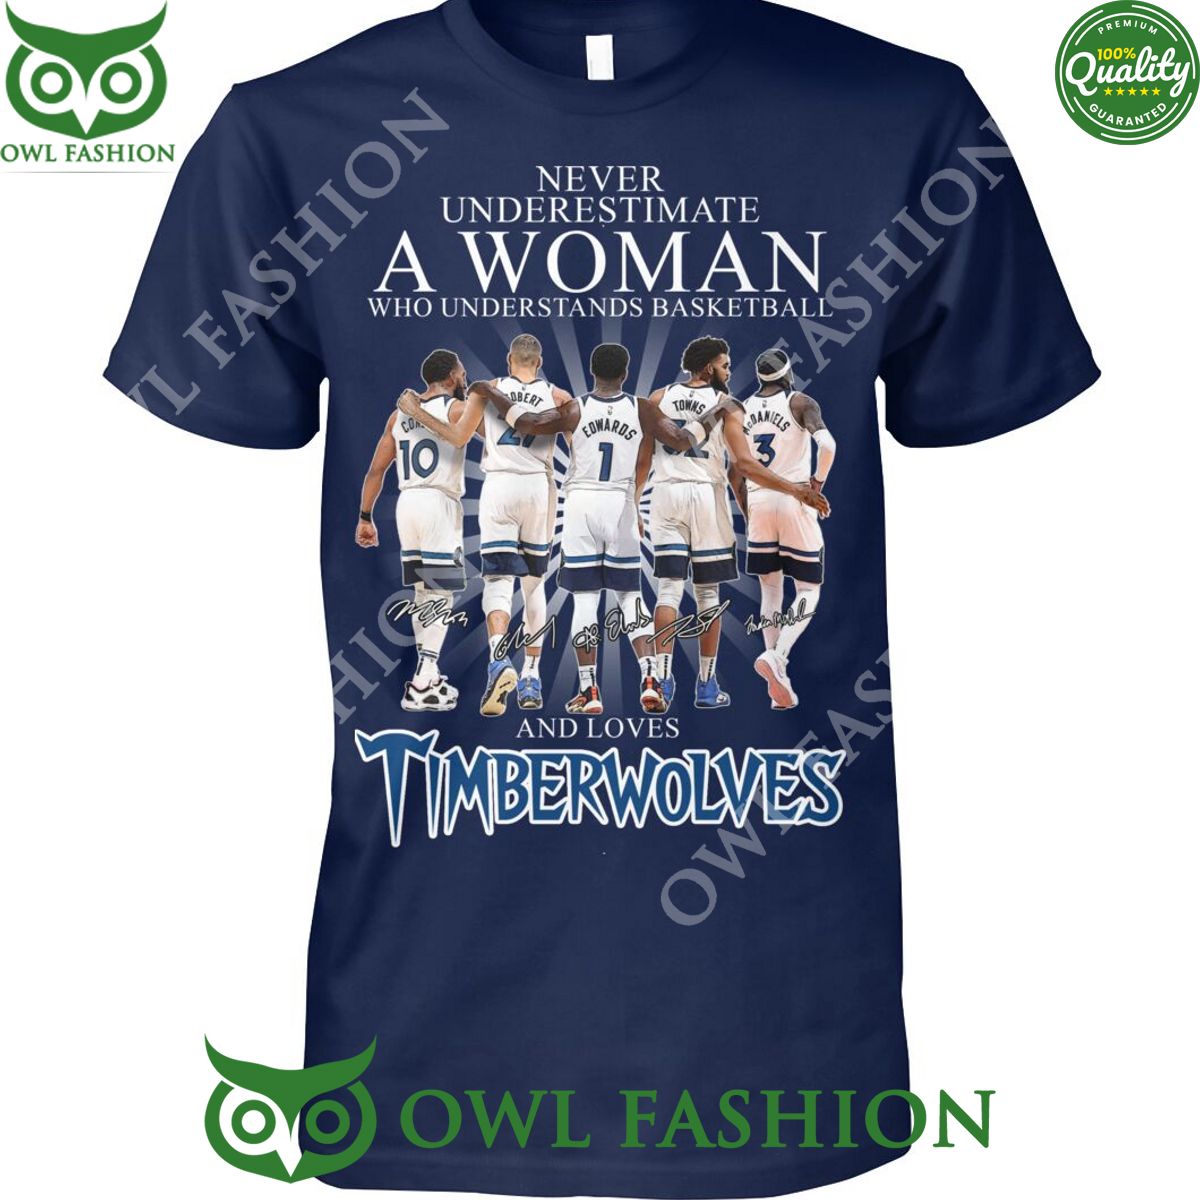 Never underrestimate a woman who understand basketball and loves Minnesota Timberwolves t shirt